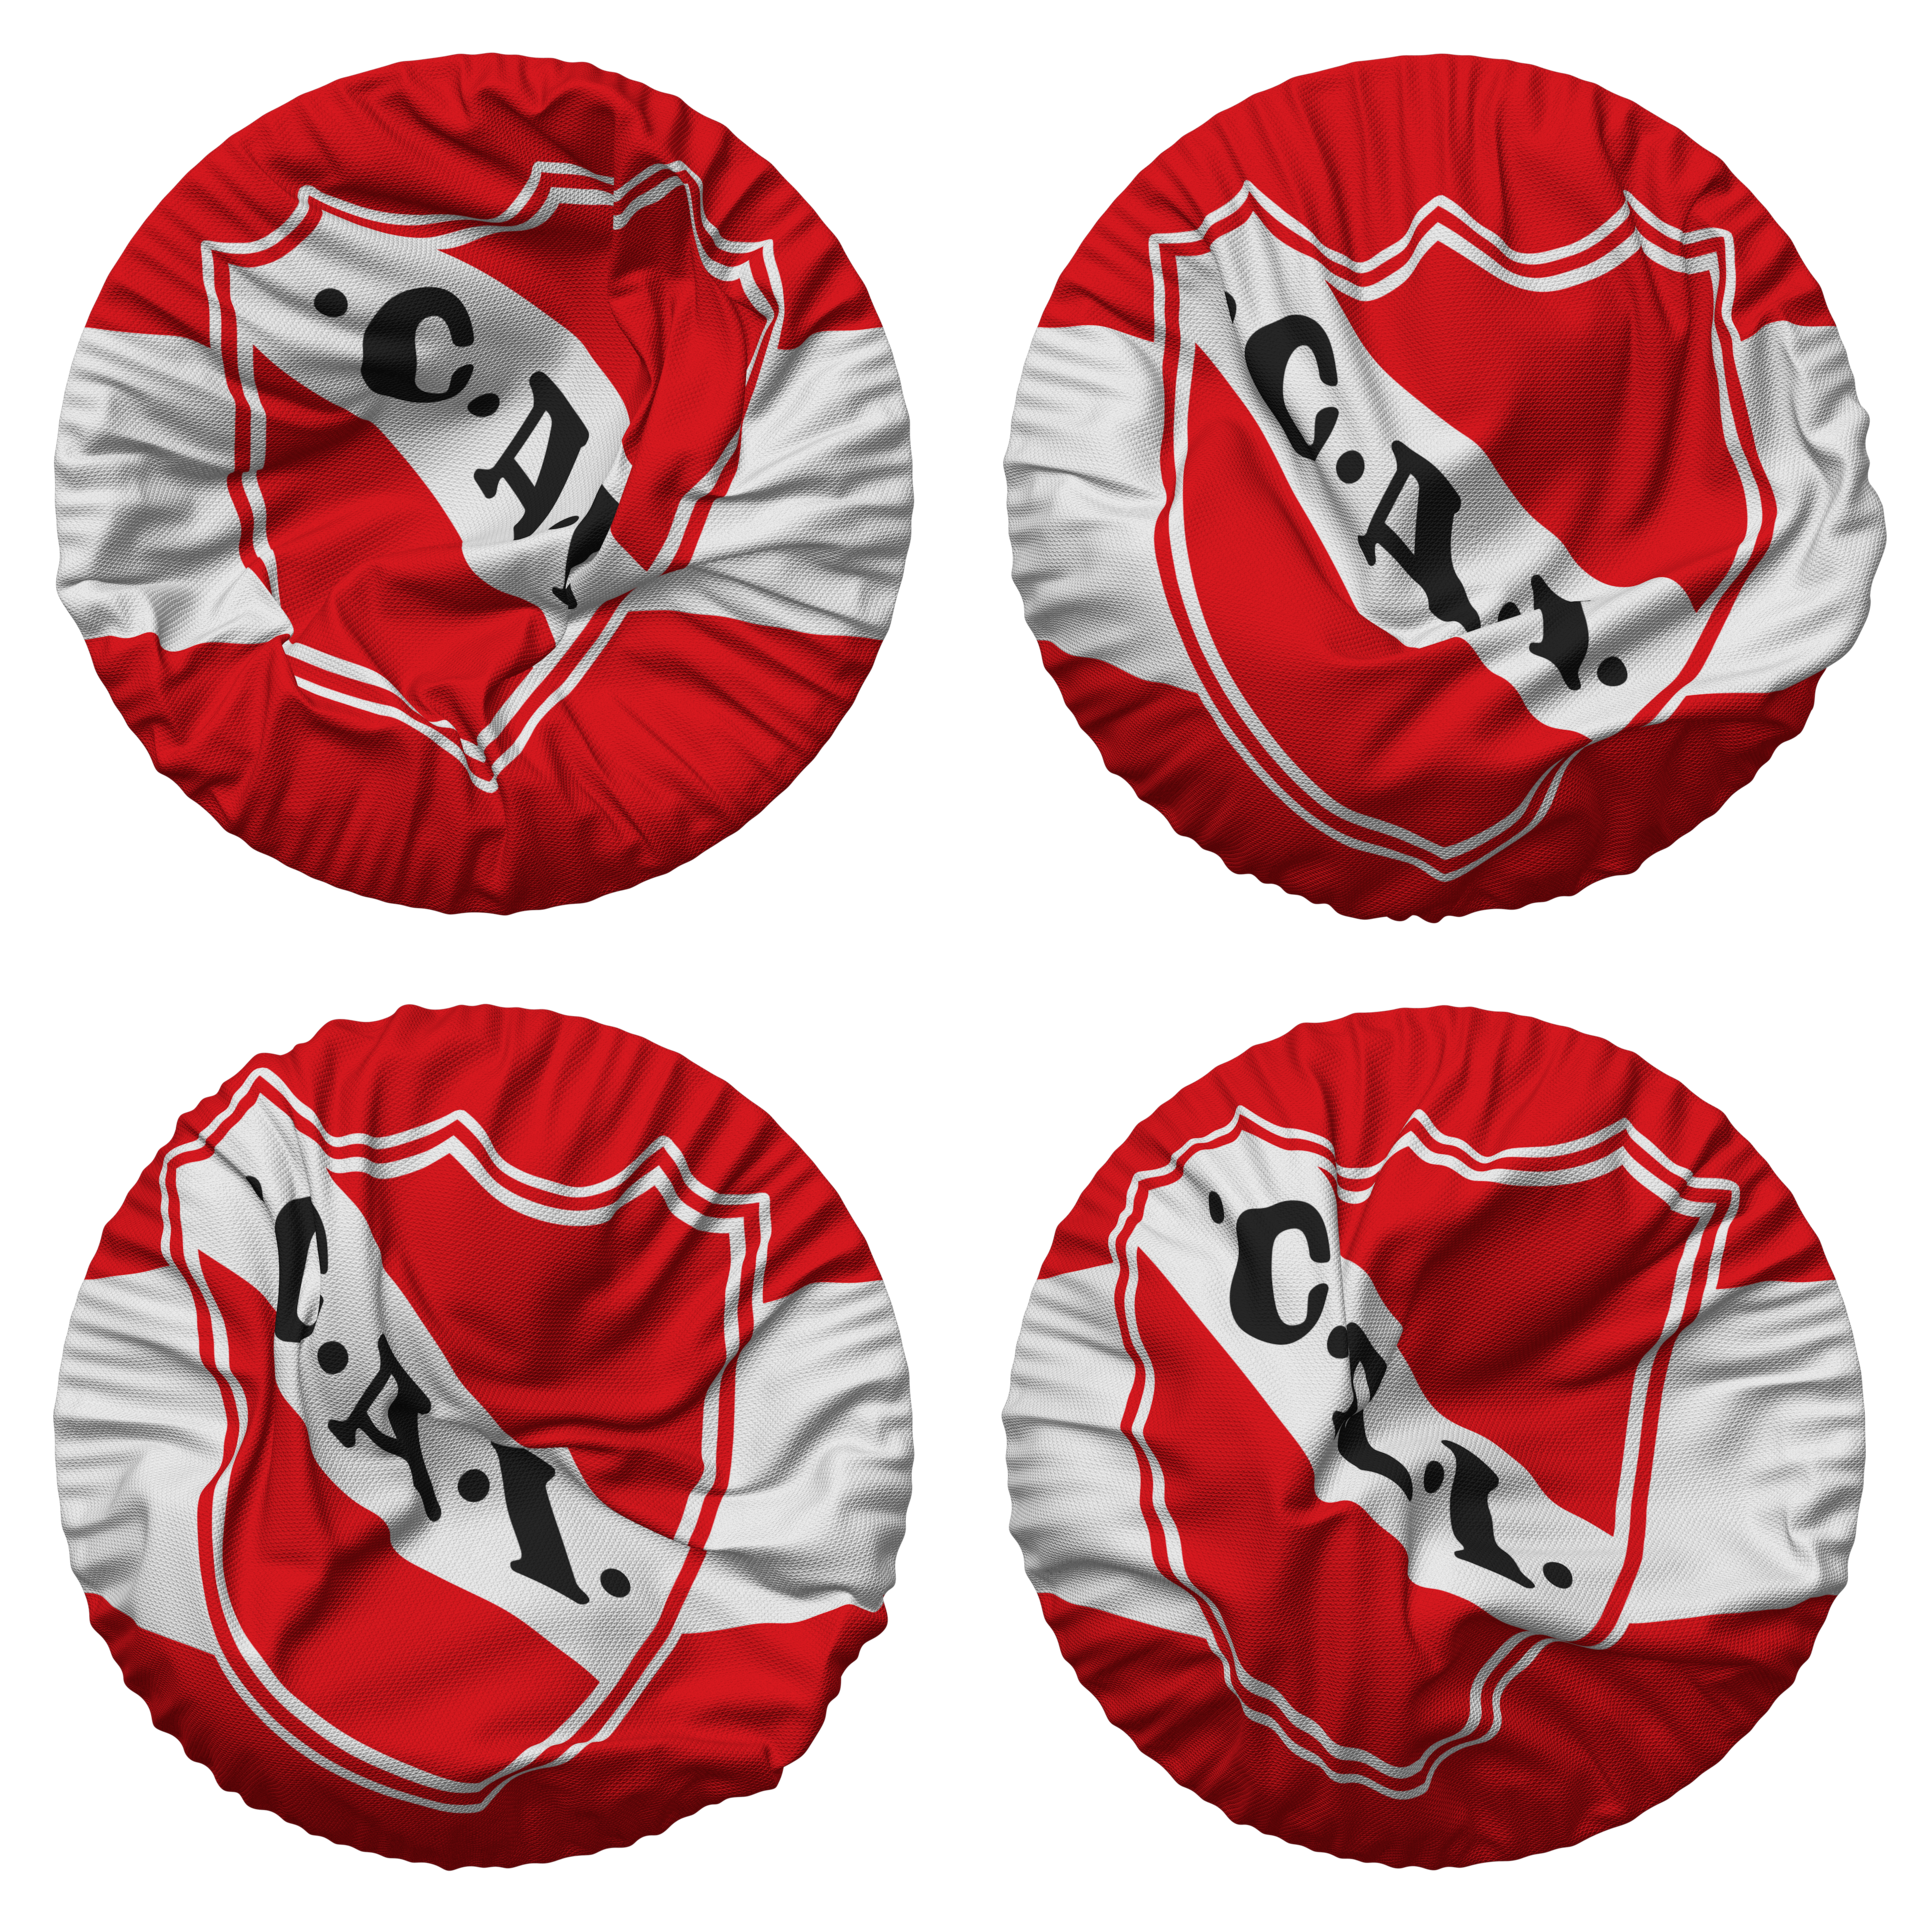 Club Atletico Independiente Flag in Round Shape Isolated with Four